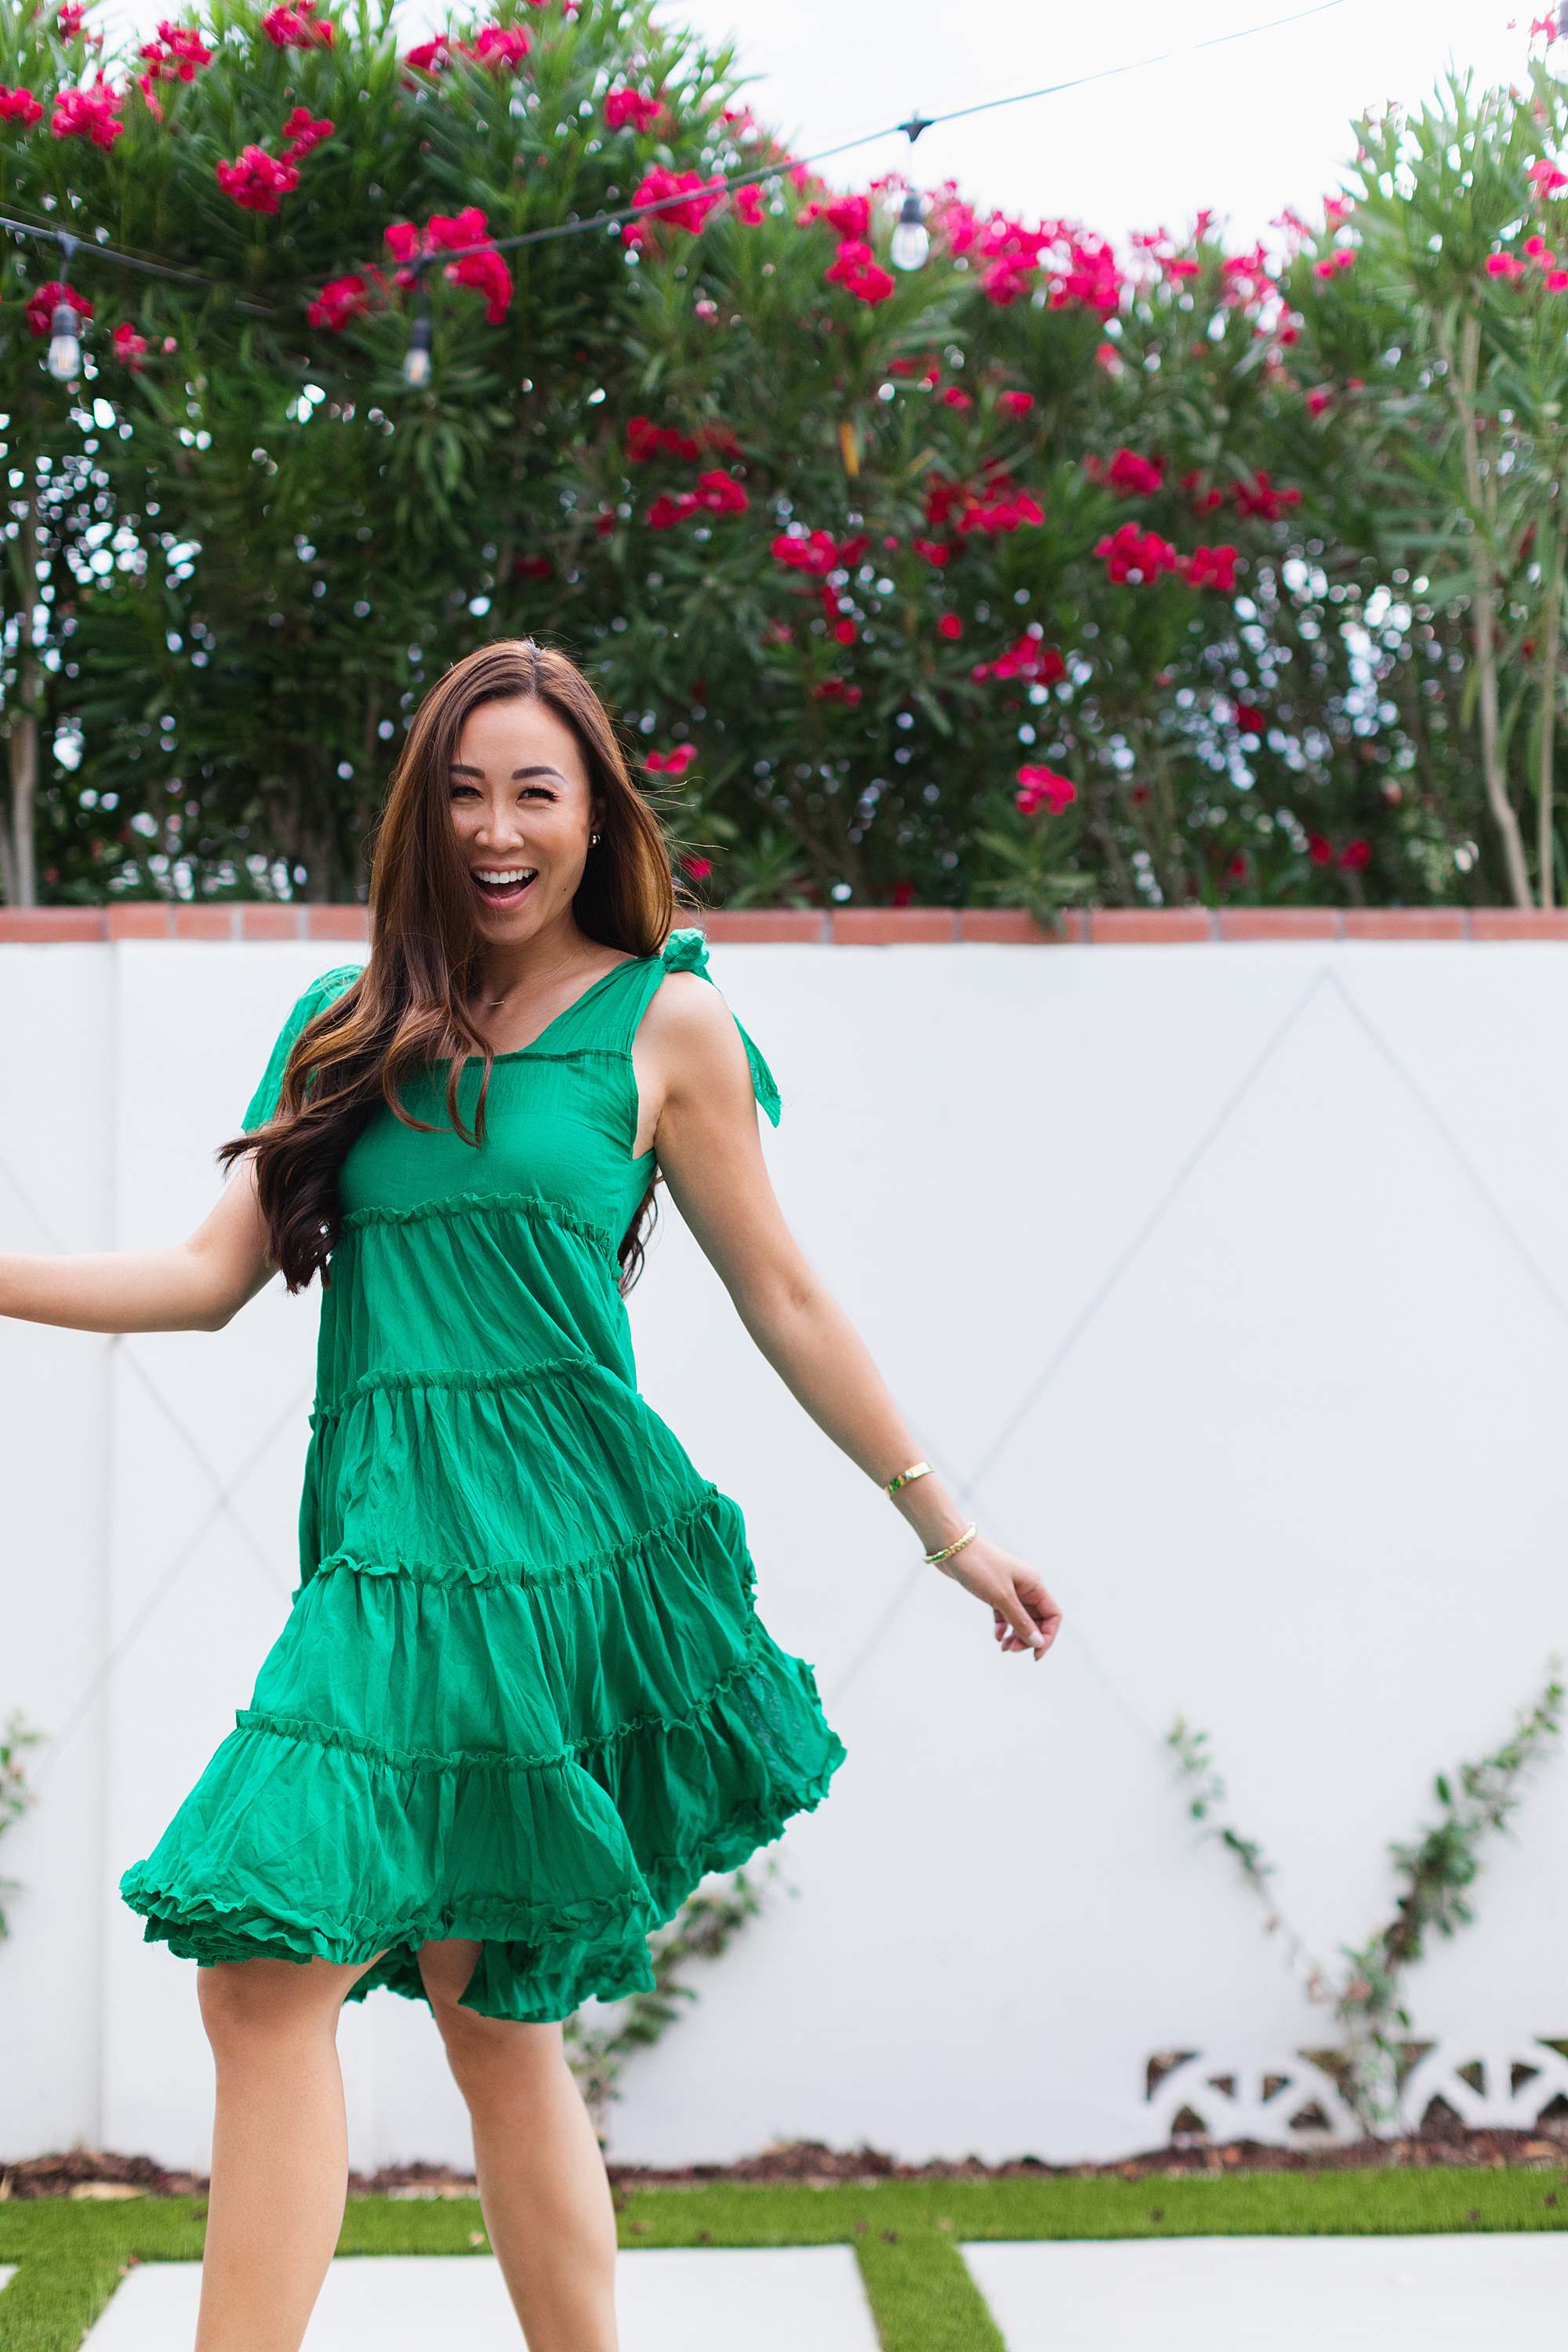 DIY frill dress made from a long skirt sewing adult craft #adultcraft green ruffle dress great for summer